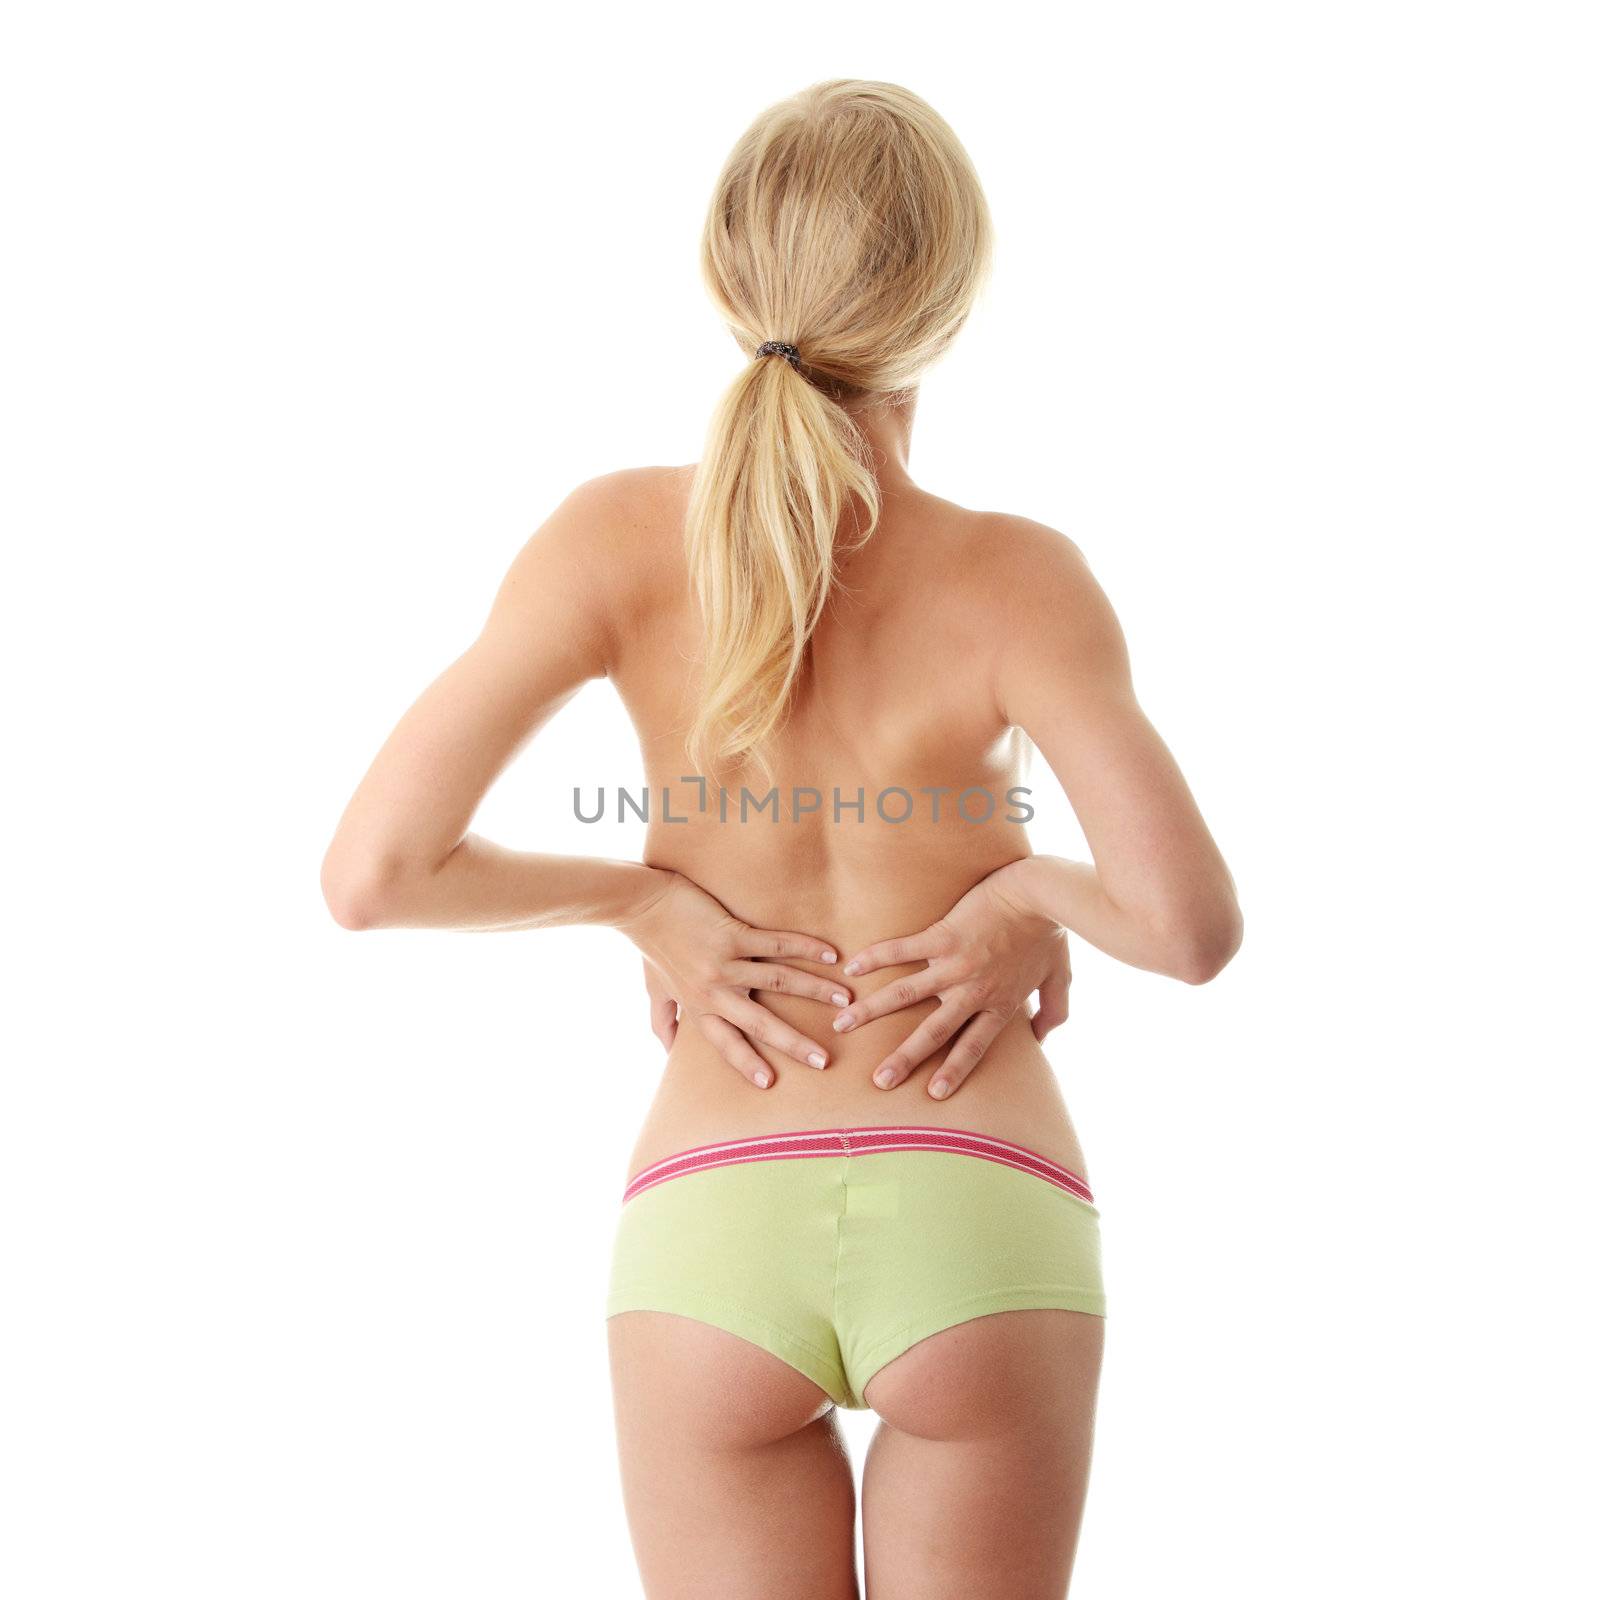 Back pain concept by BDS